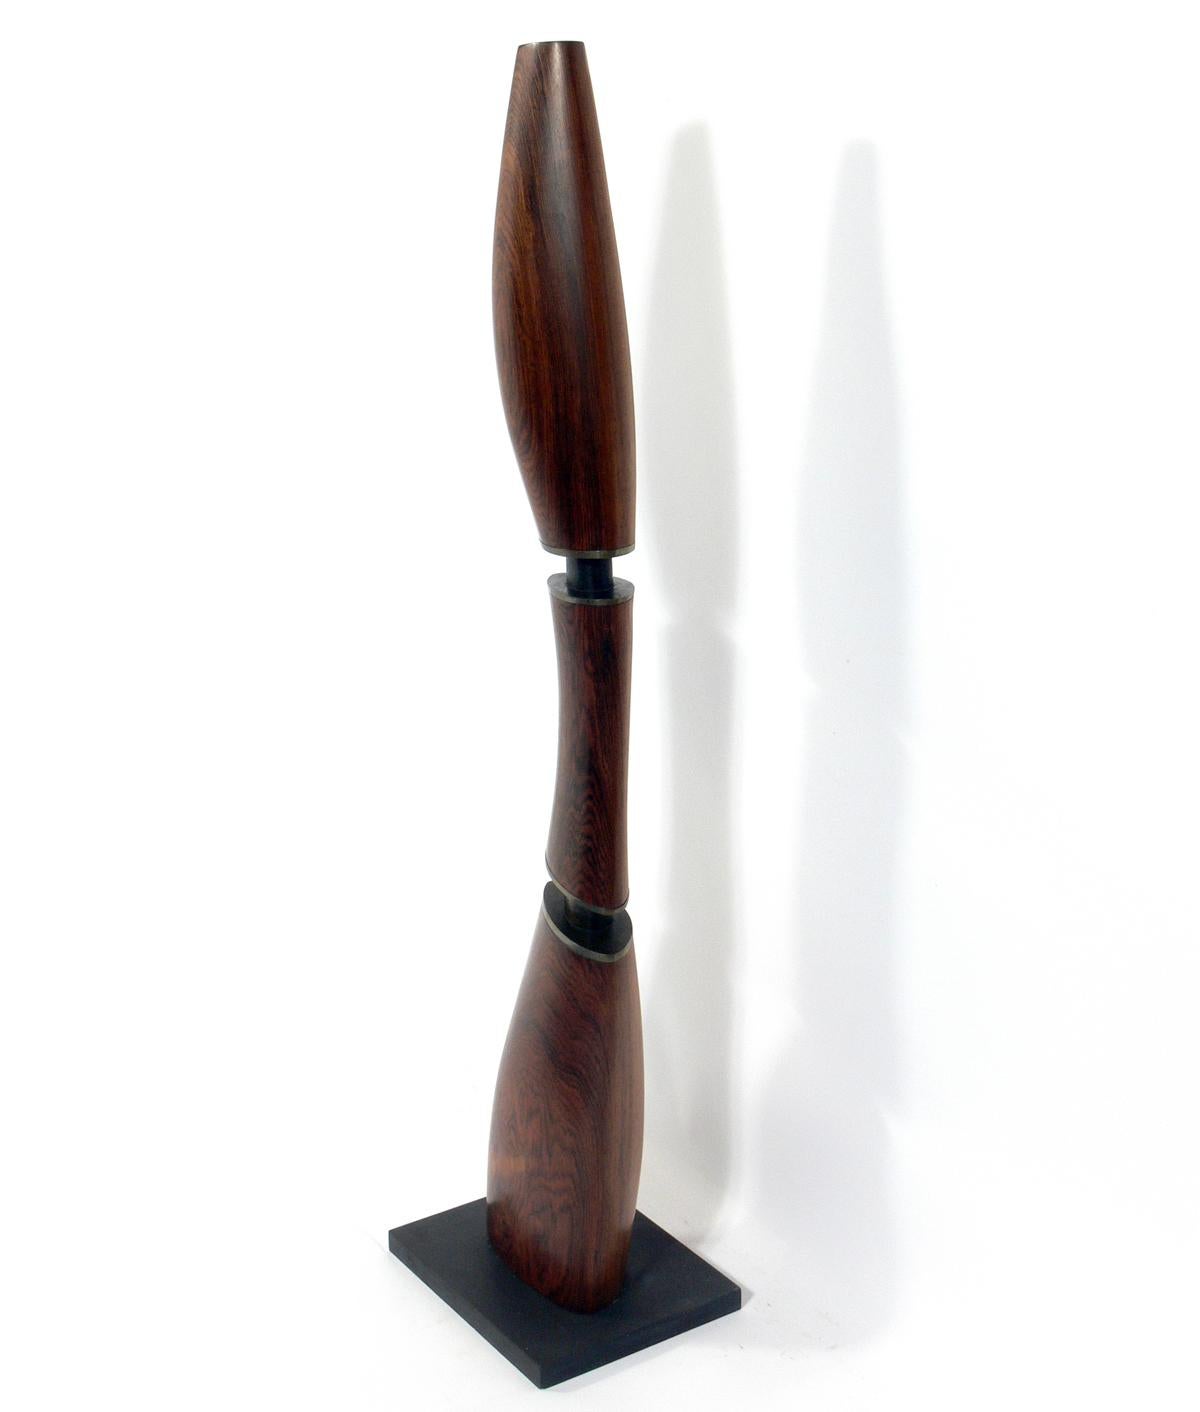 Rosewood and bronze totem Sculpture by Alden Smith, unsigned, American, (1912-1993). This large scale (51